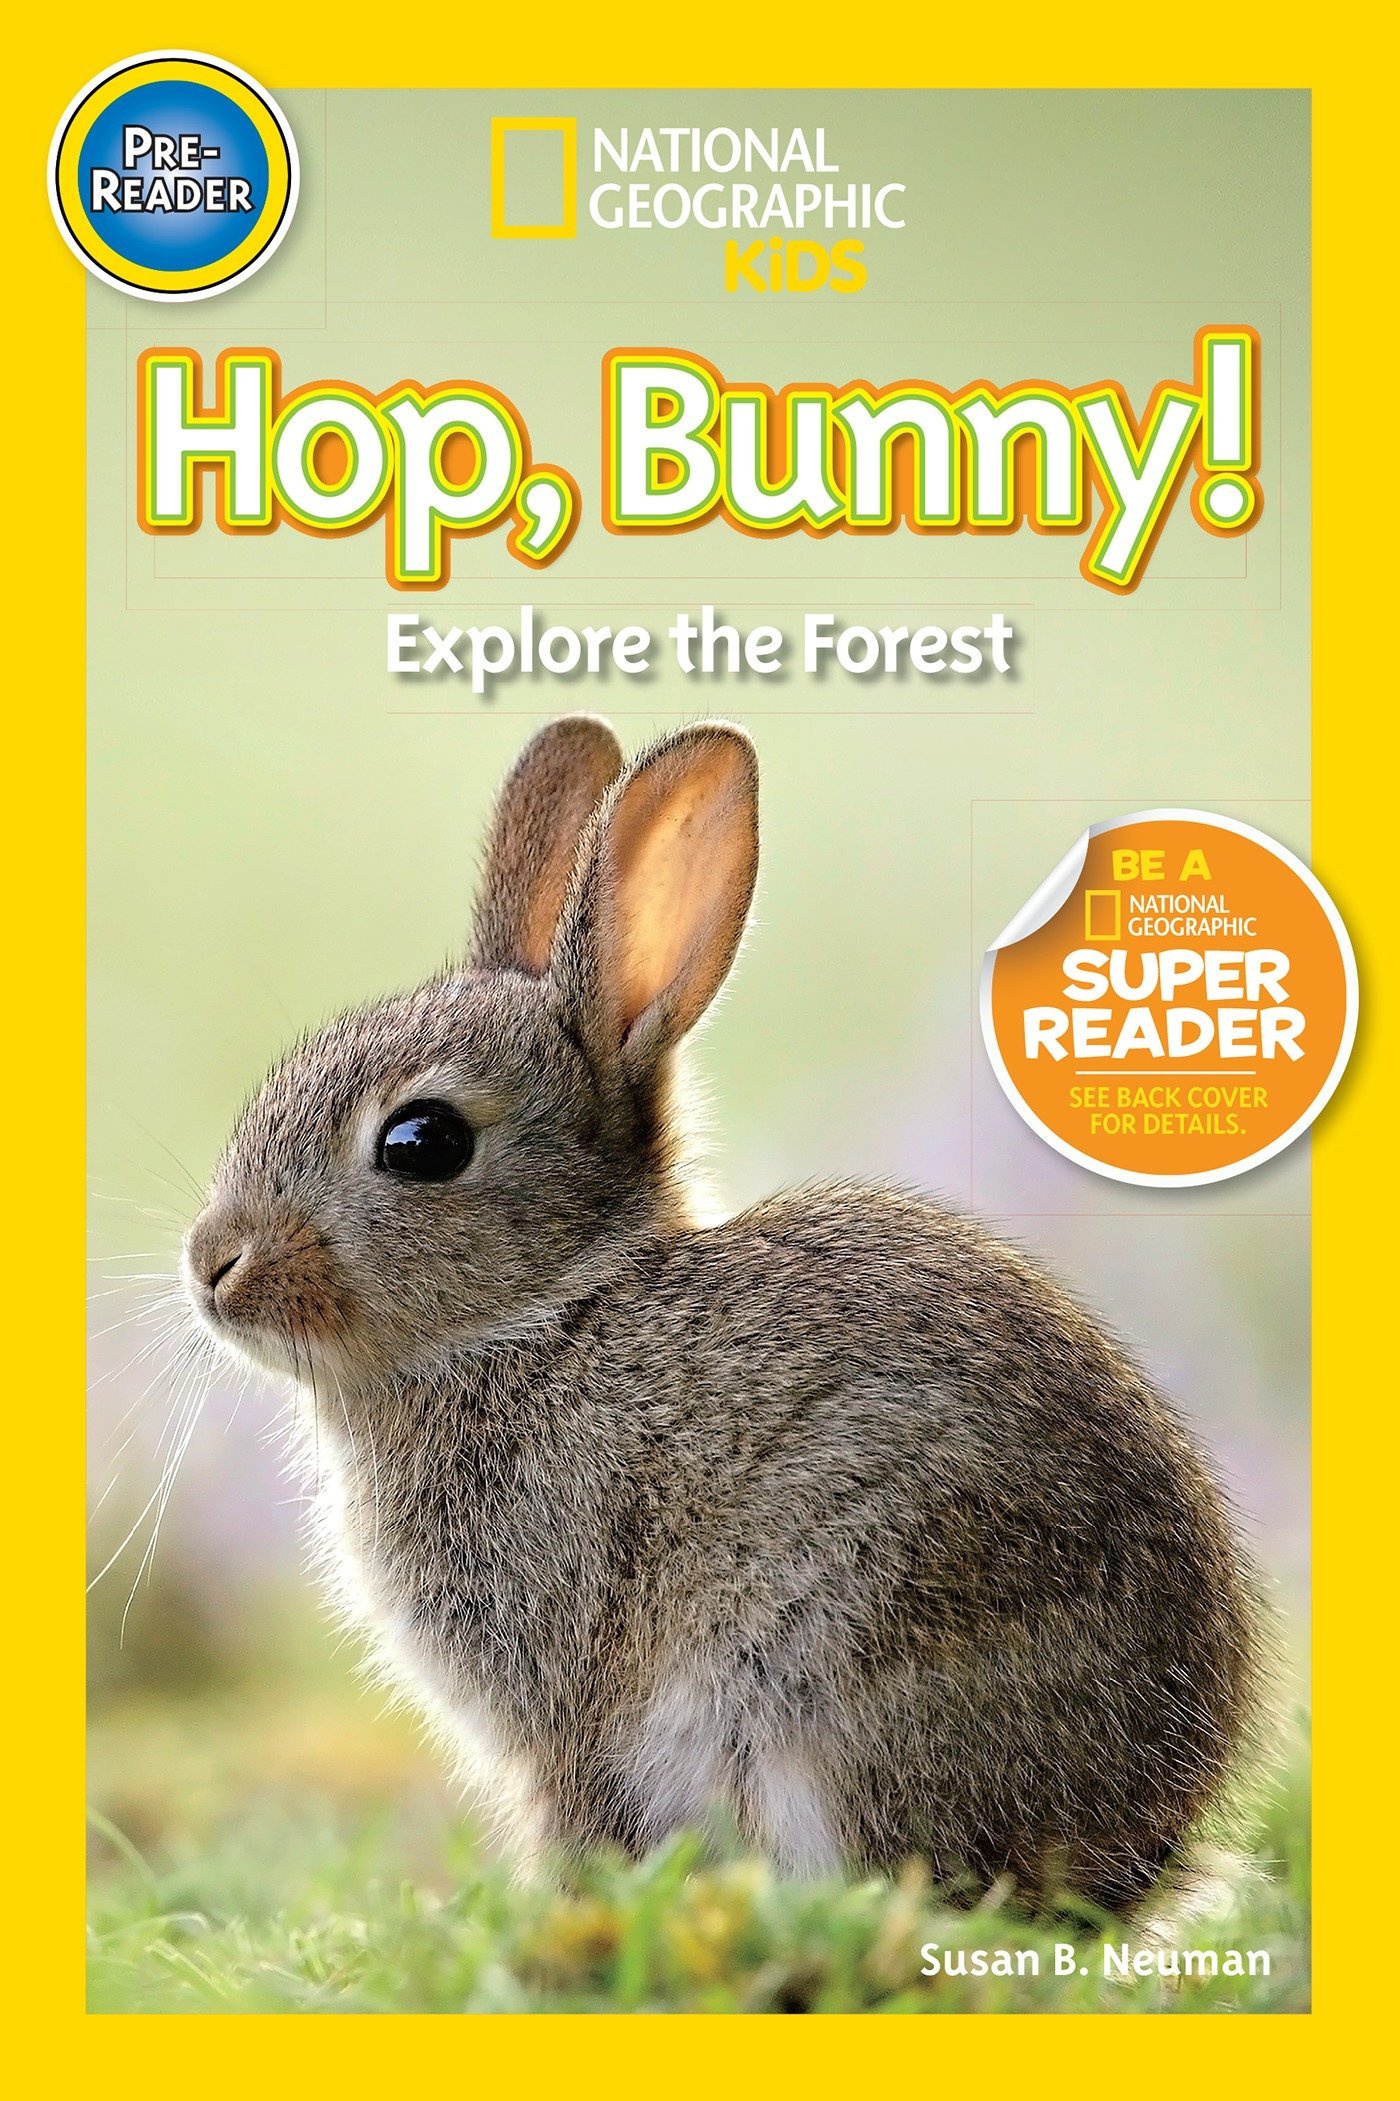 National Geographic Kids: Hop, Bunny!